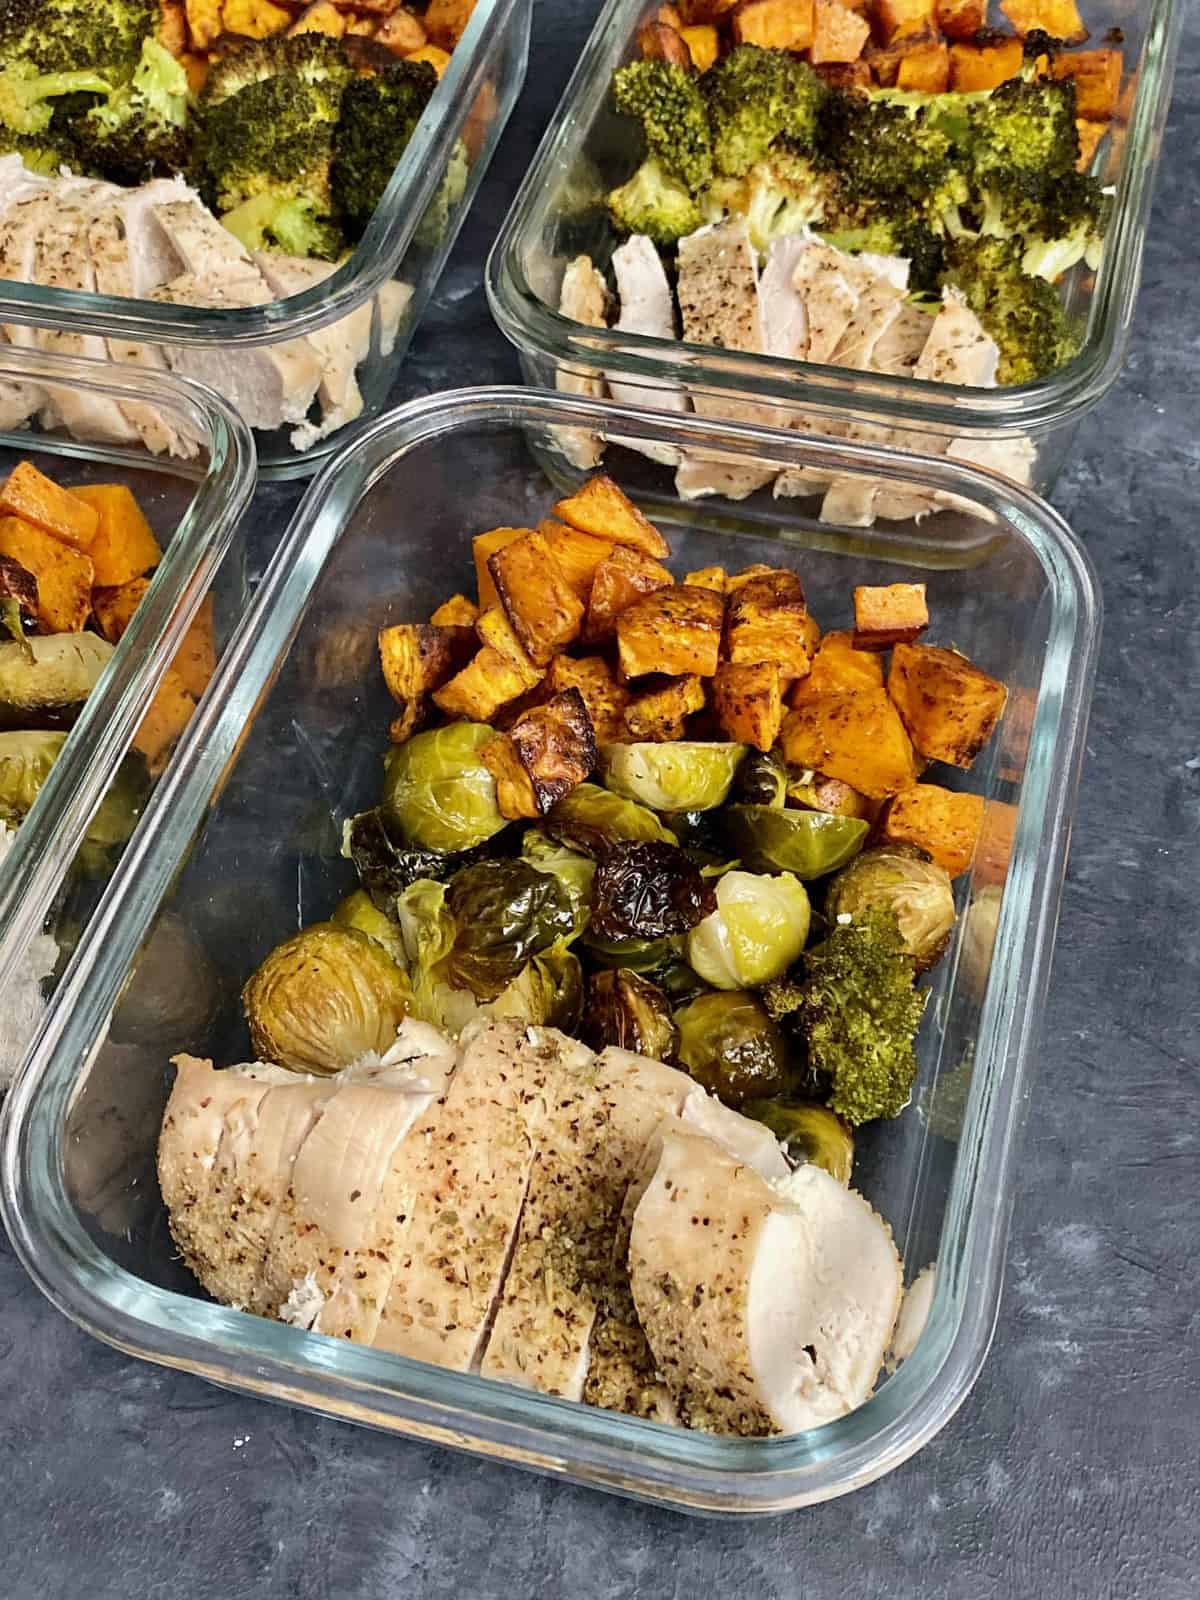 learn to meal prep chicken. Chicken and vegetables in glass containers.